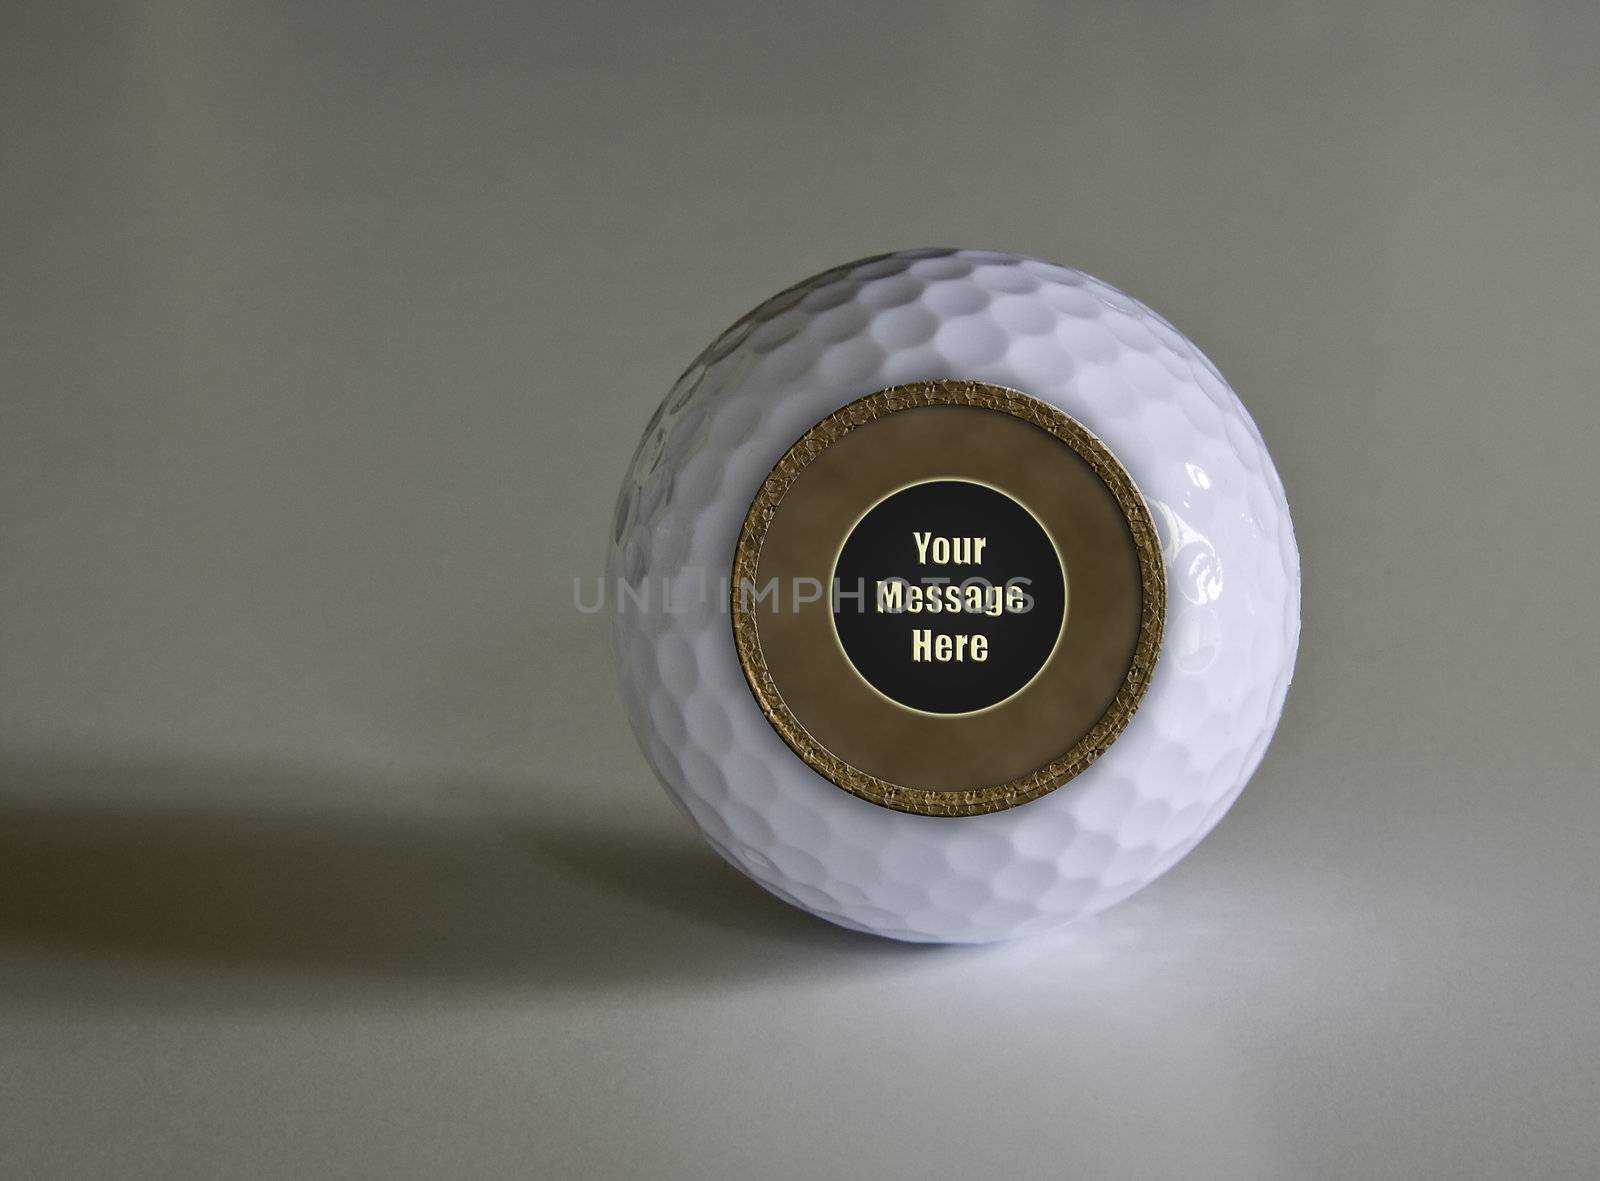 Magic Fortune telling golf ball which can be modified with any message